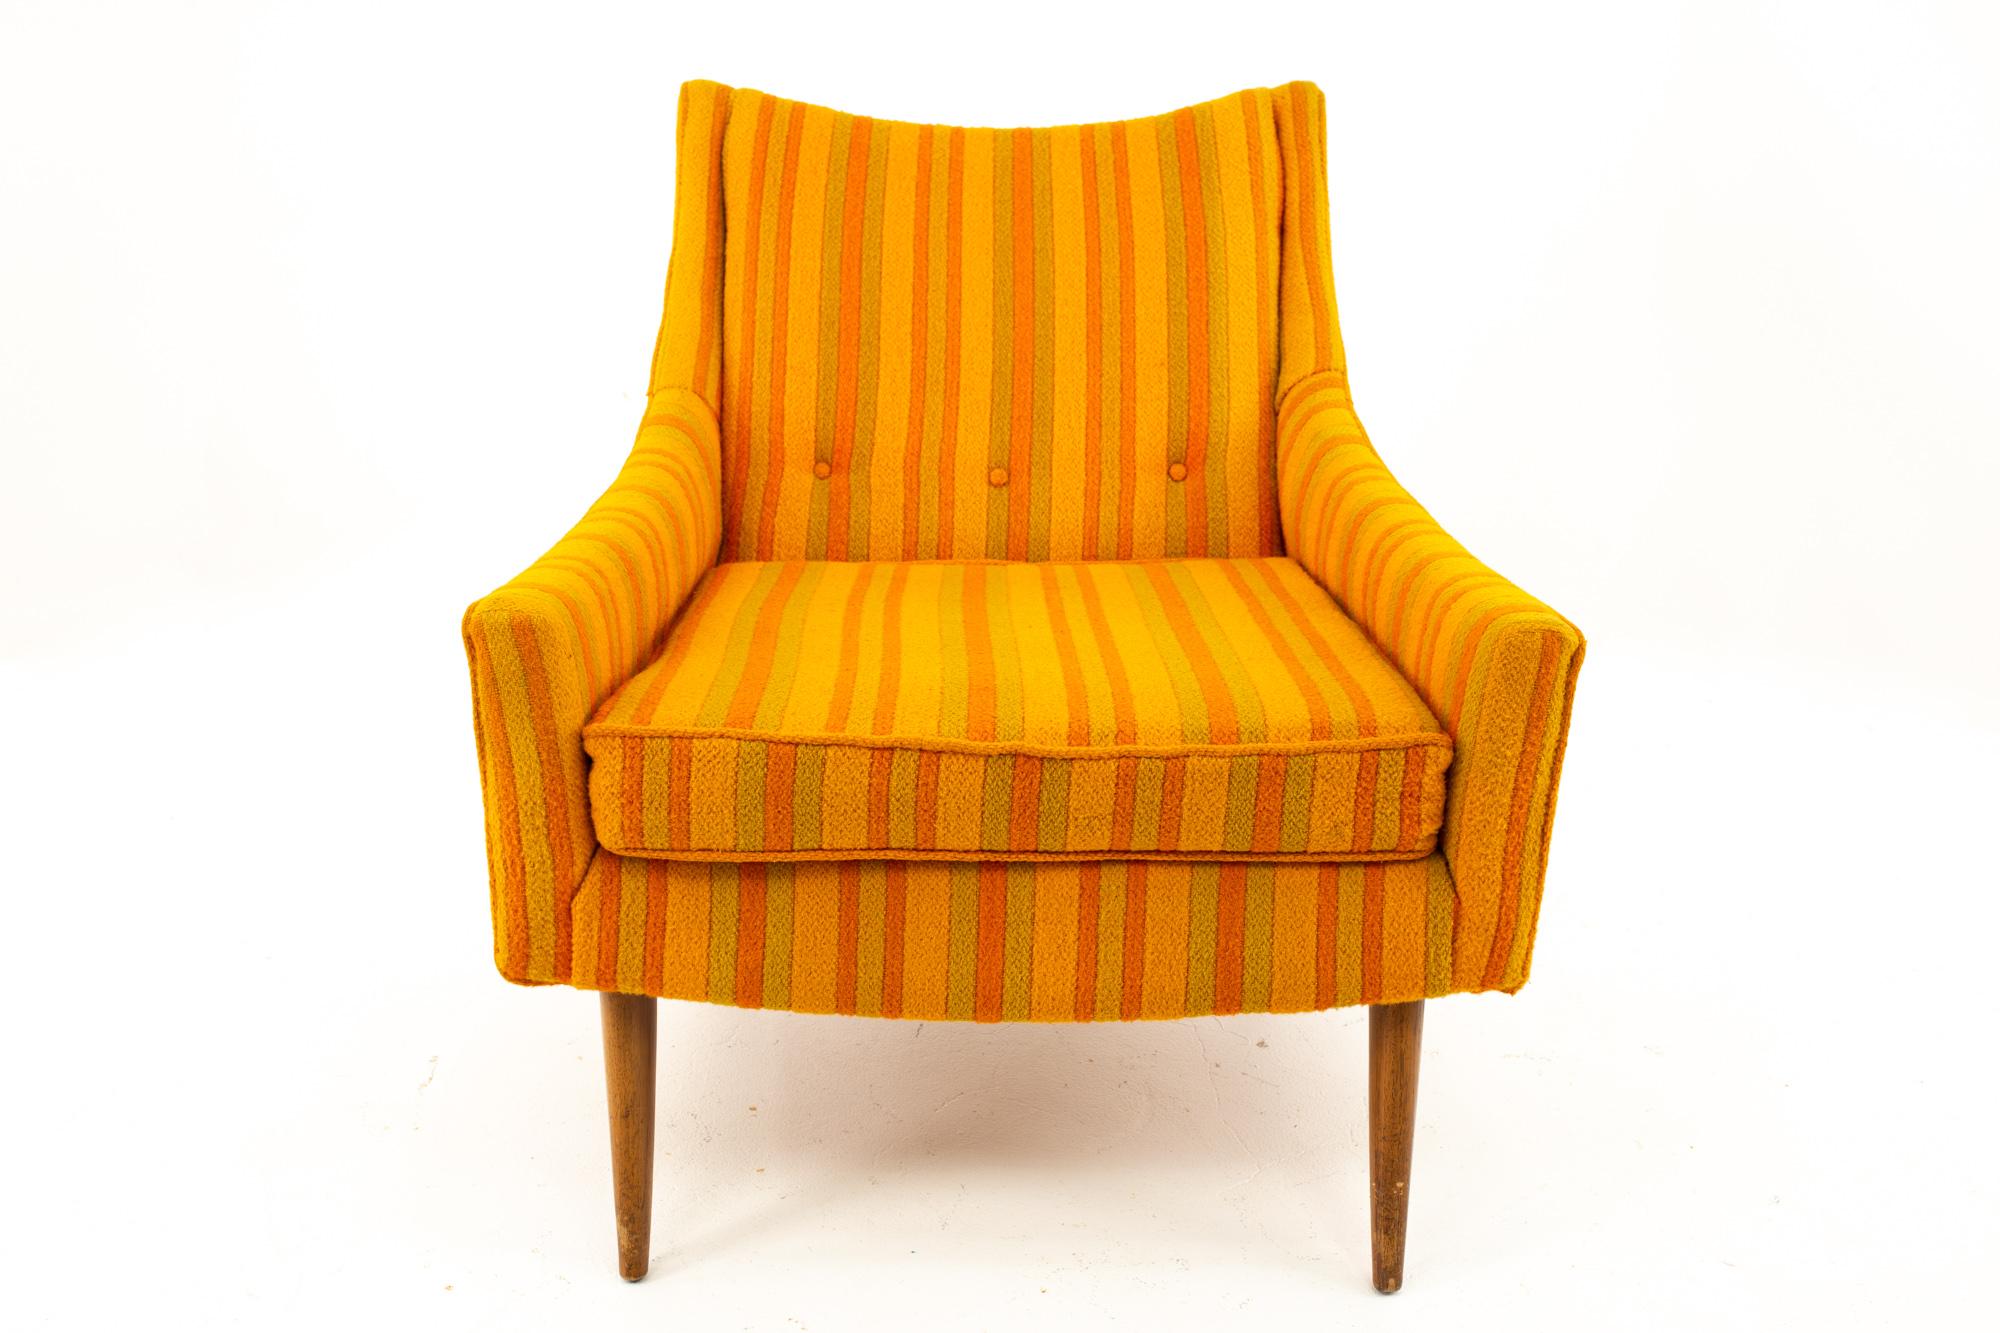 20th Century Adrian Pearsall Style Kroehler Midcentury Orange and Green Striped Lounge Chair